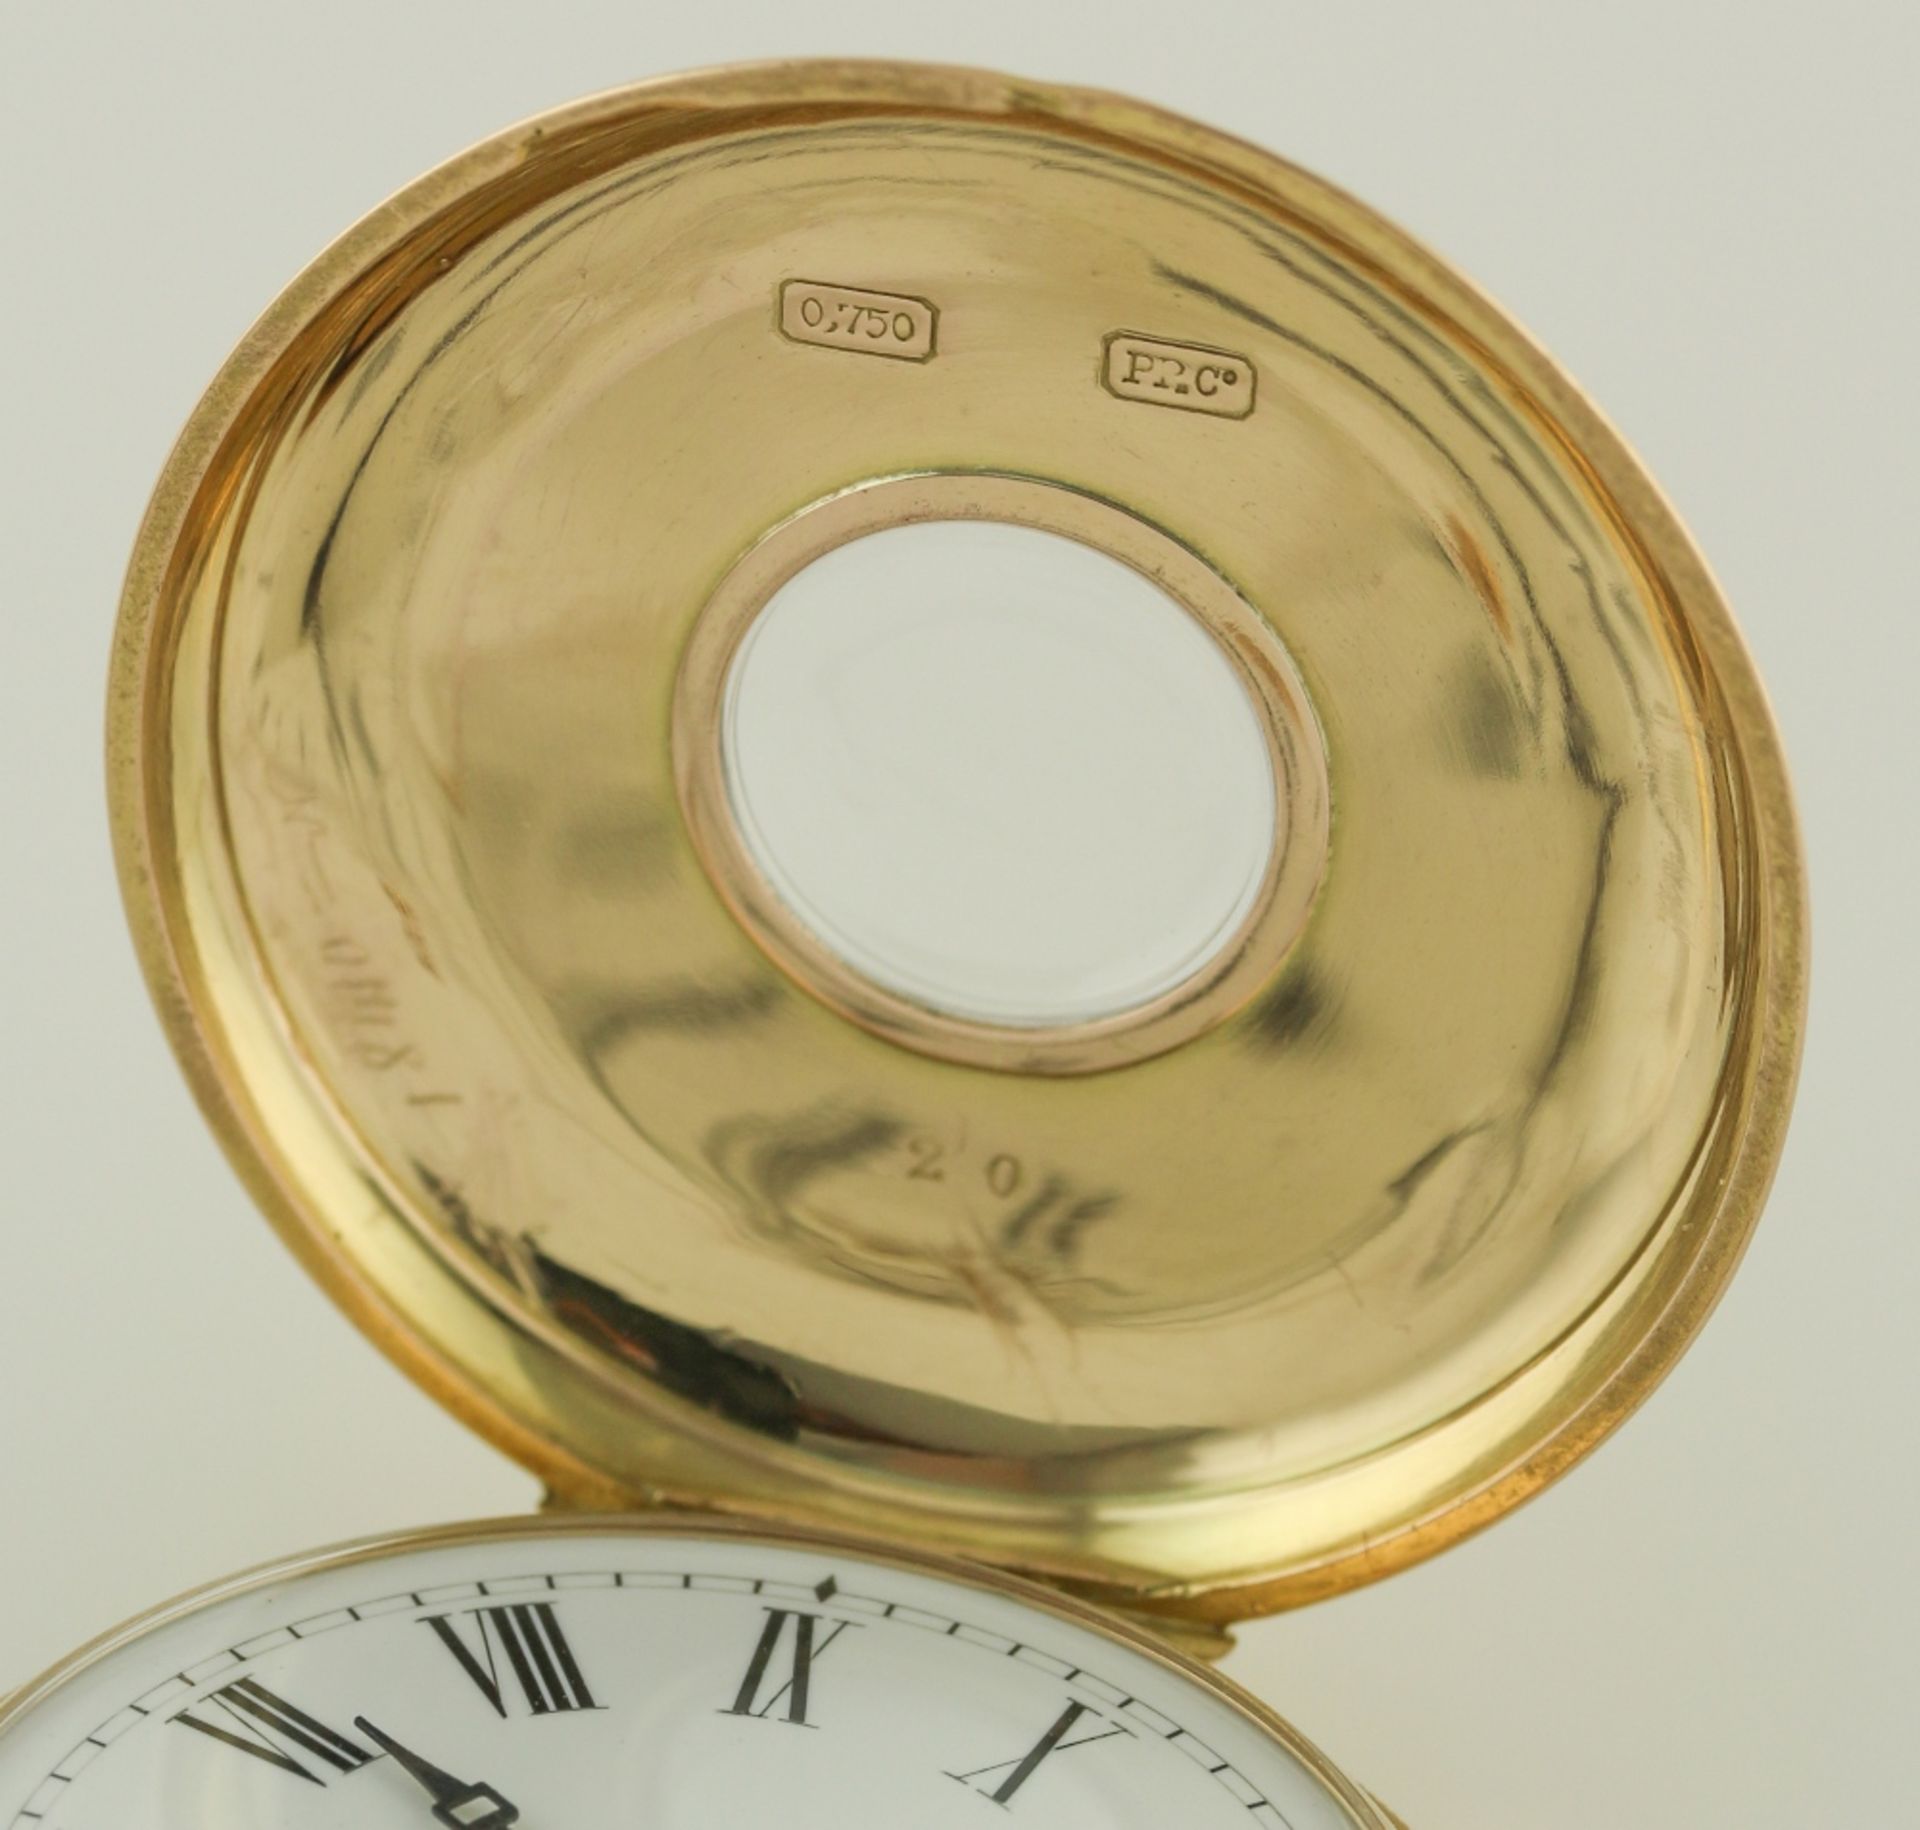 A LADIES 18K SOLID GOLD PATEK PHILIPPE HALF HUNTER POCKET WATCH CIRCA 1910, REF. 67120 MADE FOR A. - Image 5 of 9